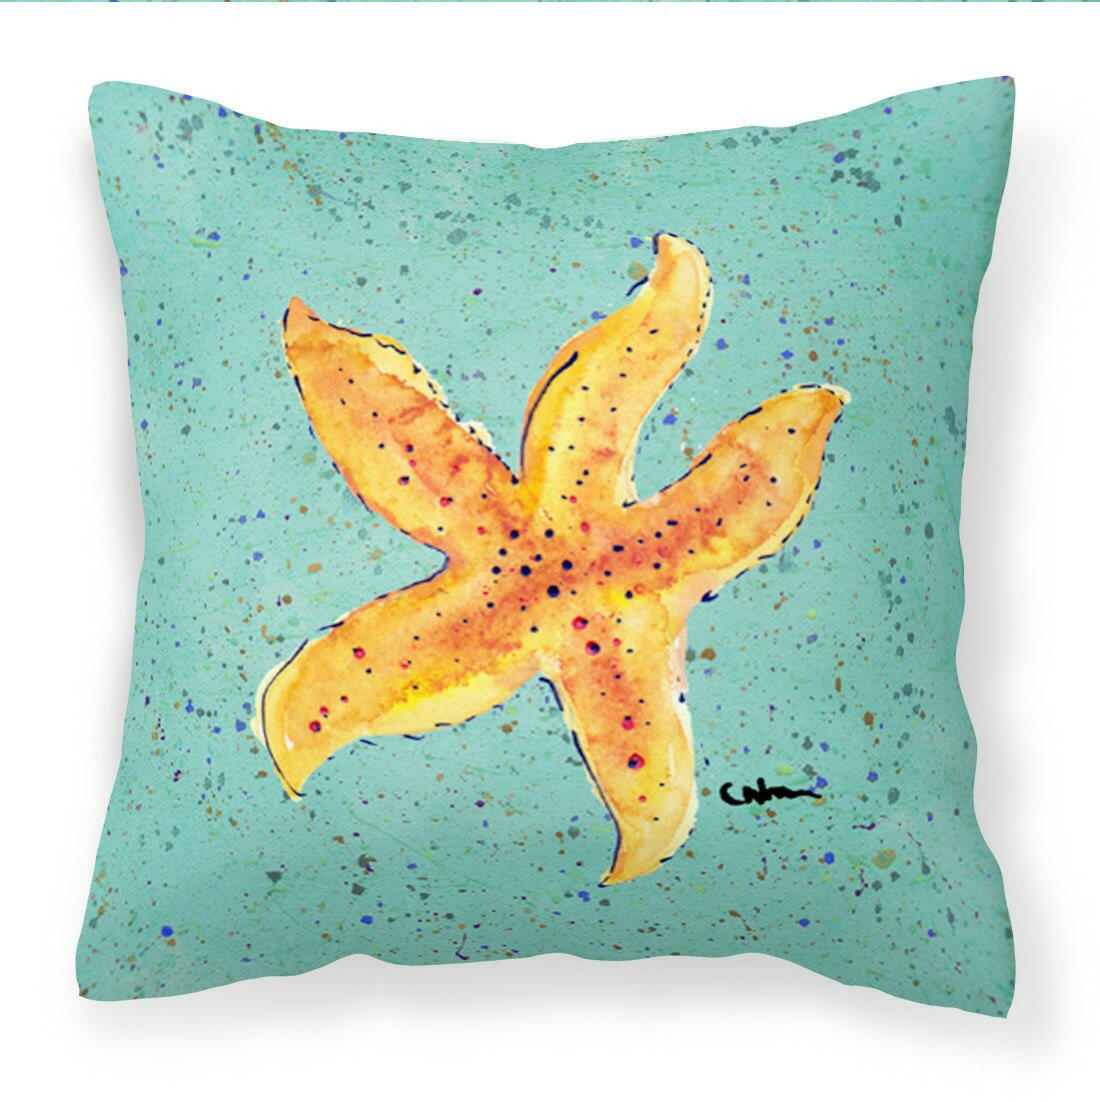 Starfish on Teal Fabric Decorative Pillow 8527PW1414 - the-store.com